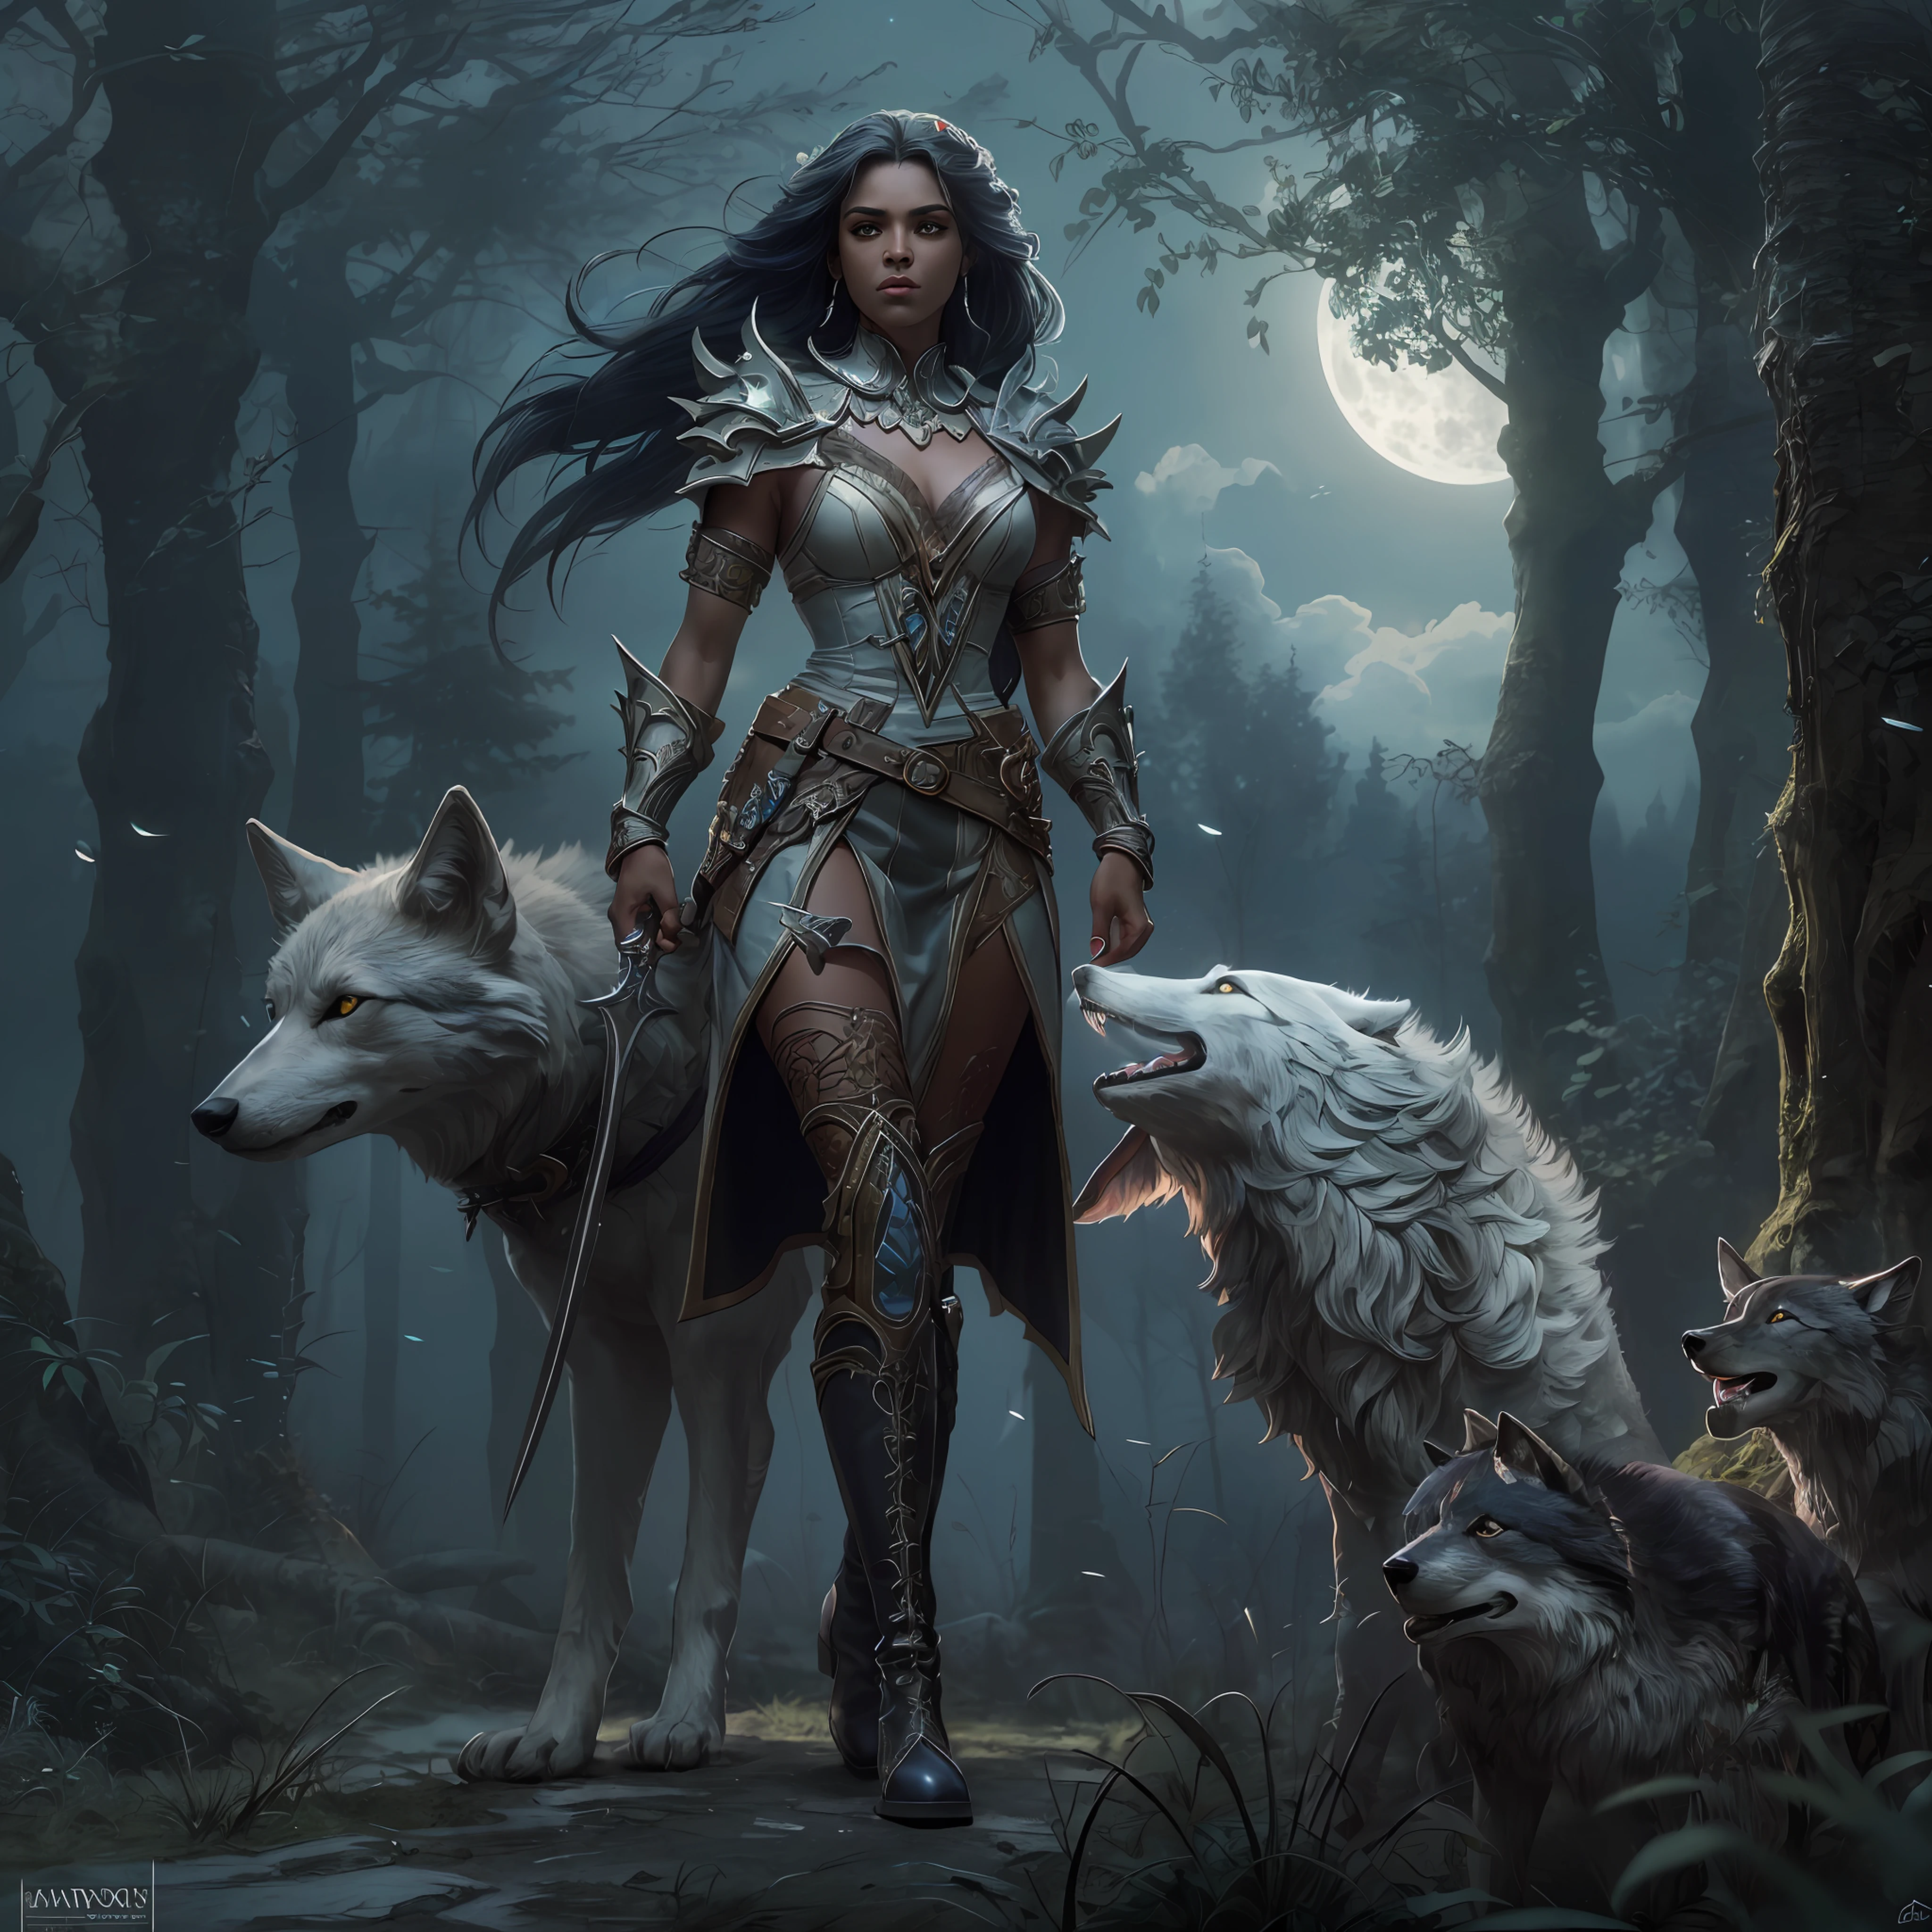 high details, best quality, 8k, [ultra detailed], masterpiece, best quality, (extremely detailed), dynamic angle, ultra wide shot, RAW, photorealistic, fantasy art, dnd art, rpg art, realistic art, a wide angle picture of a female drow ranger and her pet wolf,  warrior of nature, fighter of nature, full body, [[anatomically correct]] full body (1.5 intricate details, Masterpiece, best quality) talking to a wolf (1.6 intricate details, Masterpiece, best quality) armed with a sword  (1.5 intricate details, Masterpiece, best quality). in dark forest (1.5 intricate details, Masterpiece, best quality), a female  dark elf wearing leather armor (1.4 intricate details, Masterpiece, best quality), leather boots, thick hair, long hair, white hair, black skin intense eyes, forest  background (intense details), moon light, stars light, clouds (1.4 intricate details, Masterpiece, best quality), dynamic angle, (1.4 intricate details, Masterpiece, best quality) 3D rendering, high details, best quality, highres, ultra wide angle